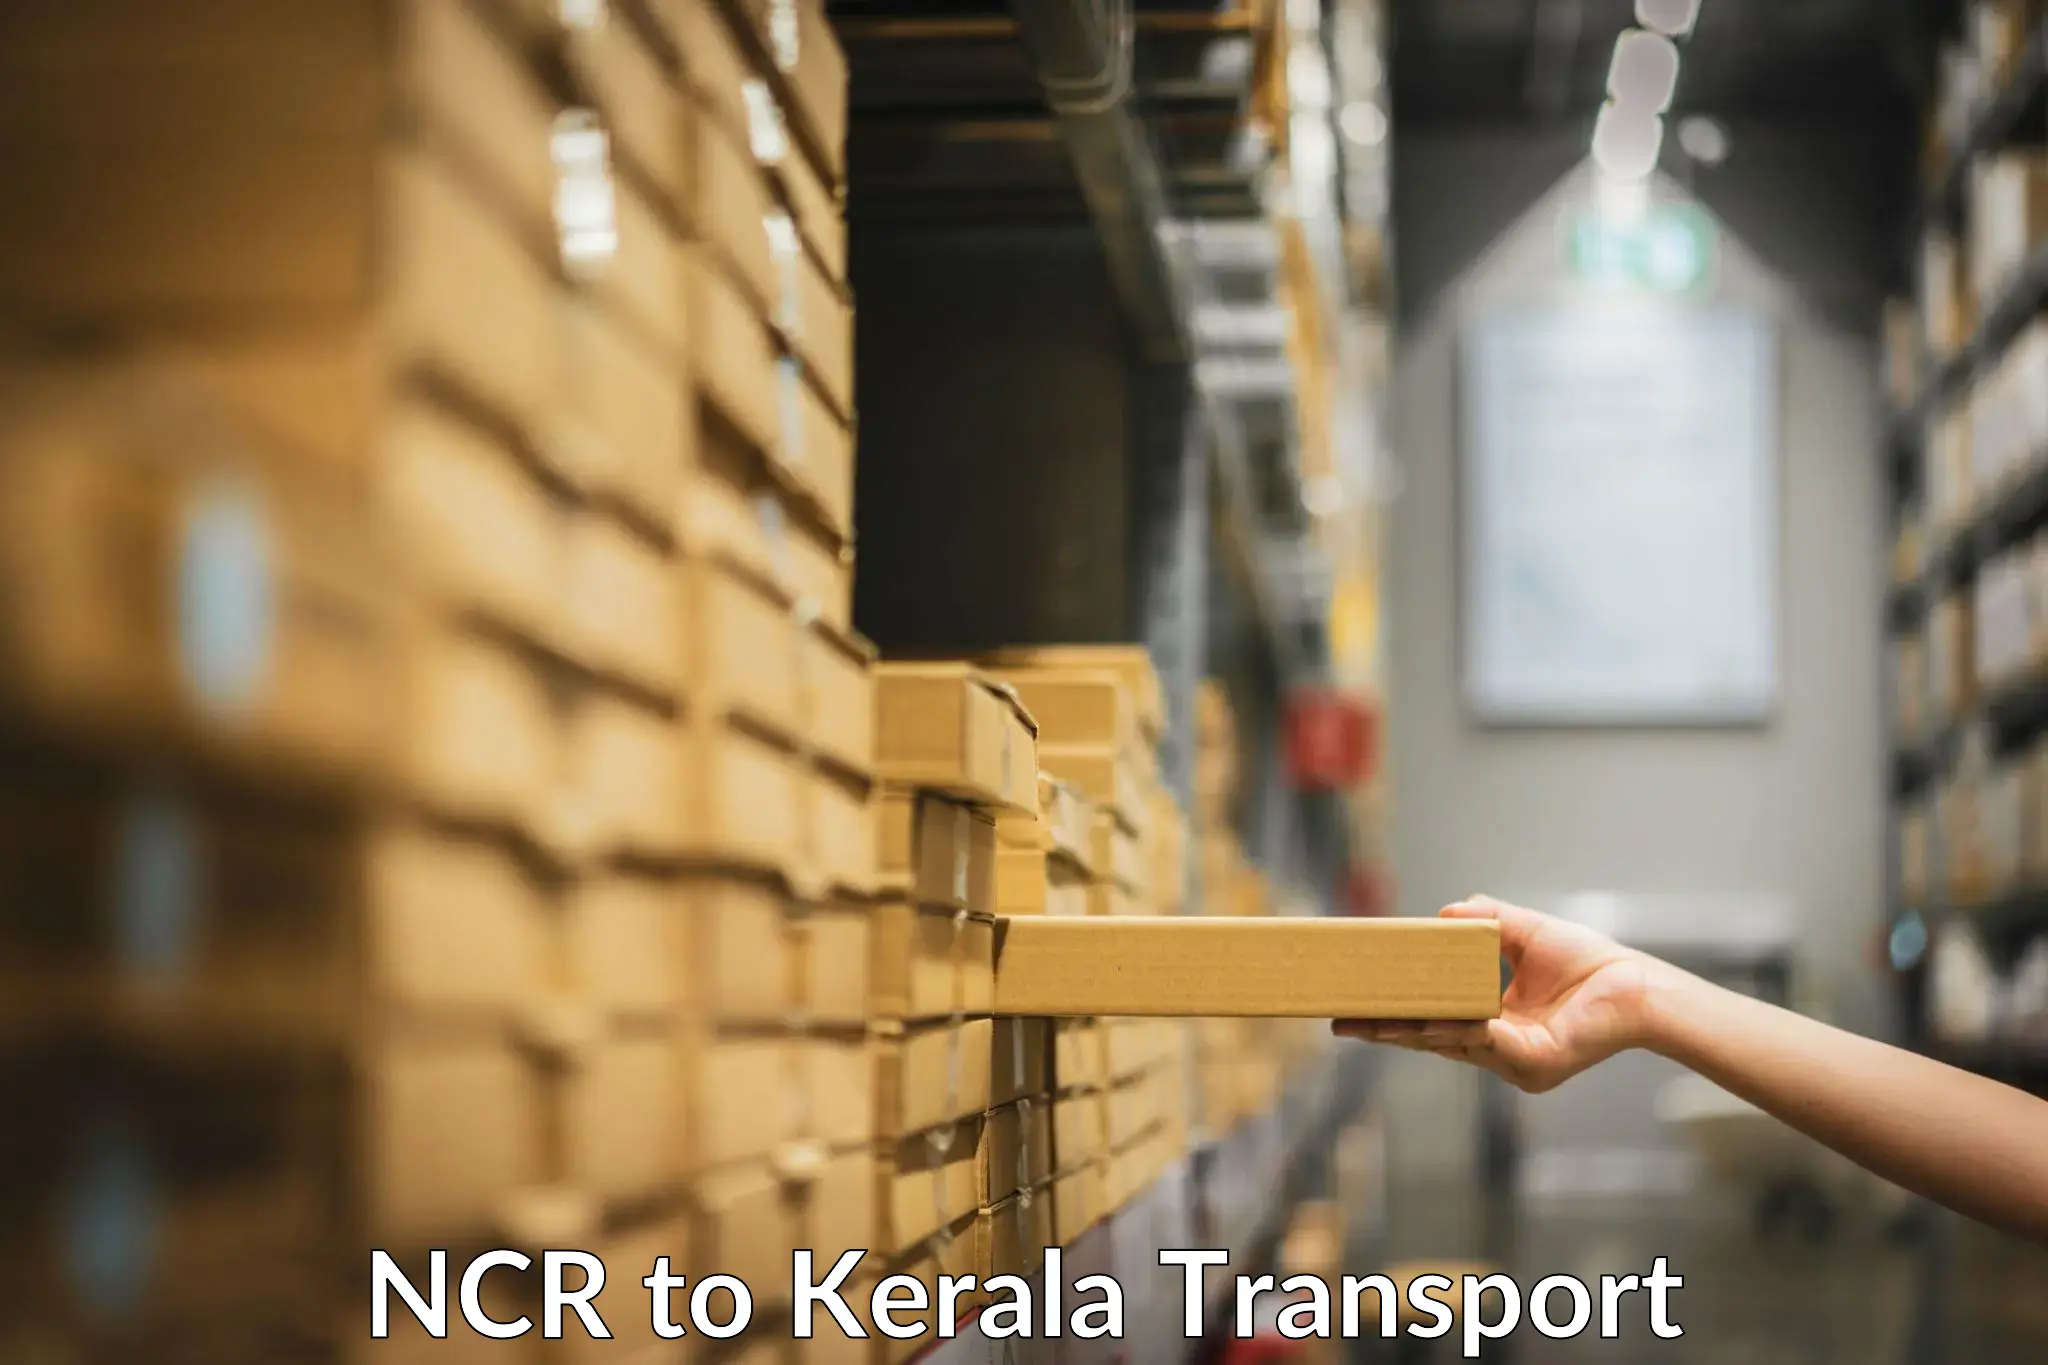 Furniture transport service NCR to Cochin University of Science and Technology